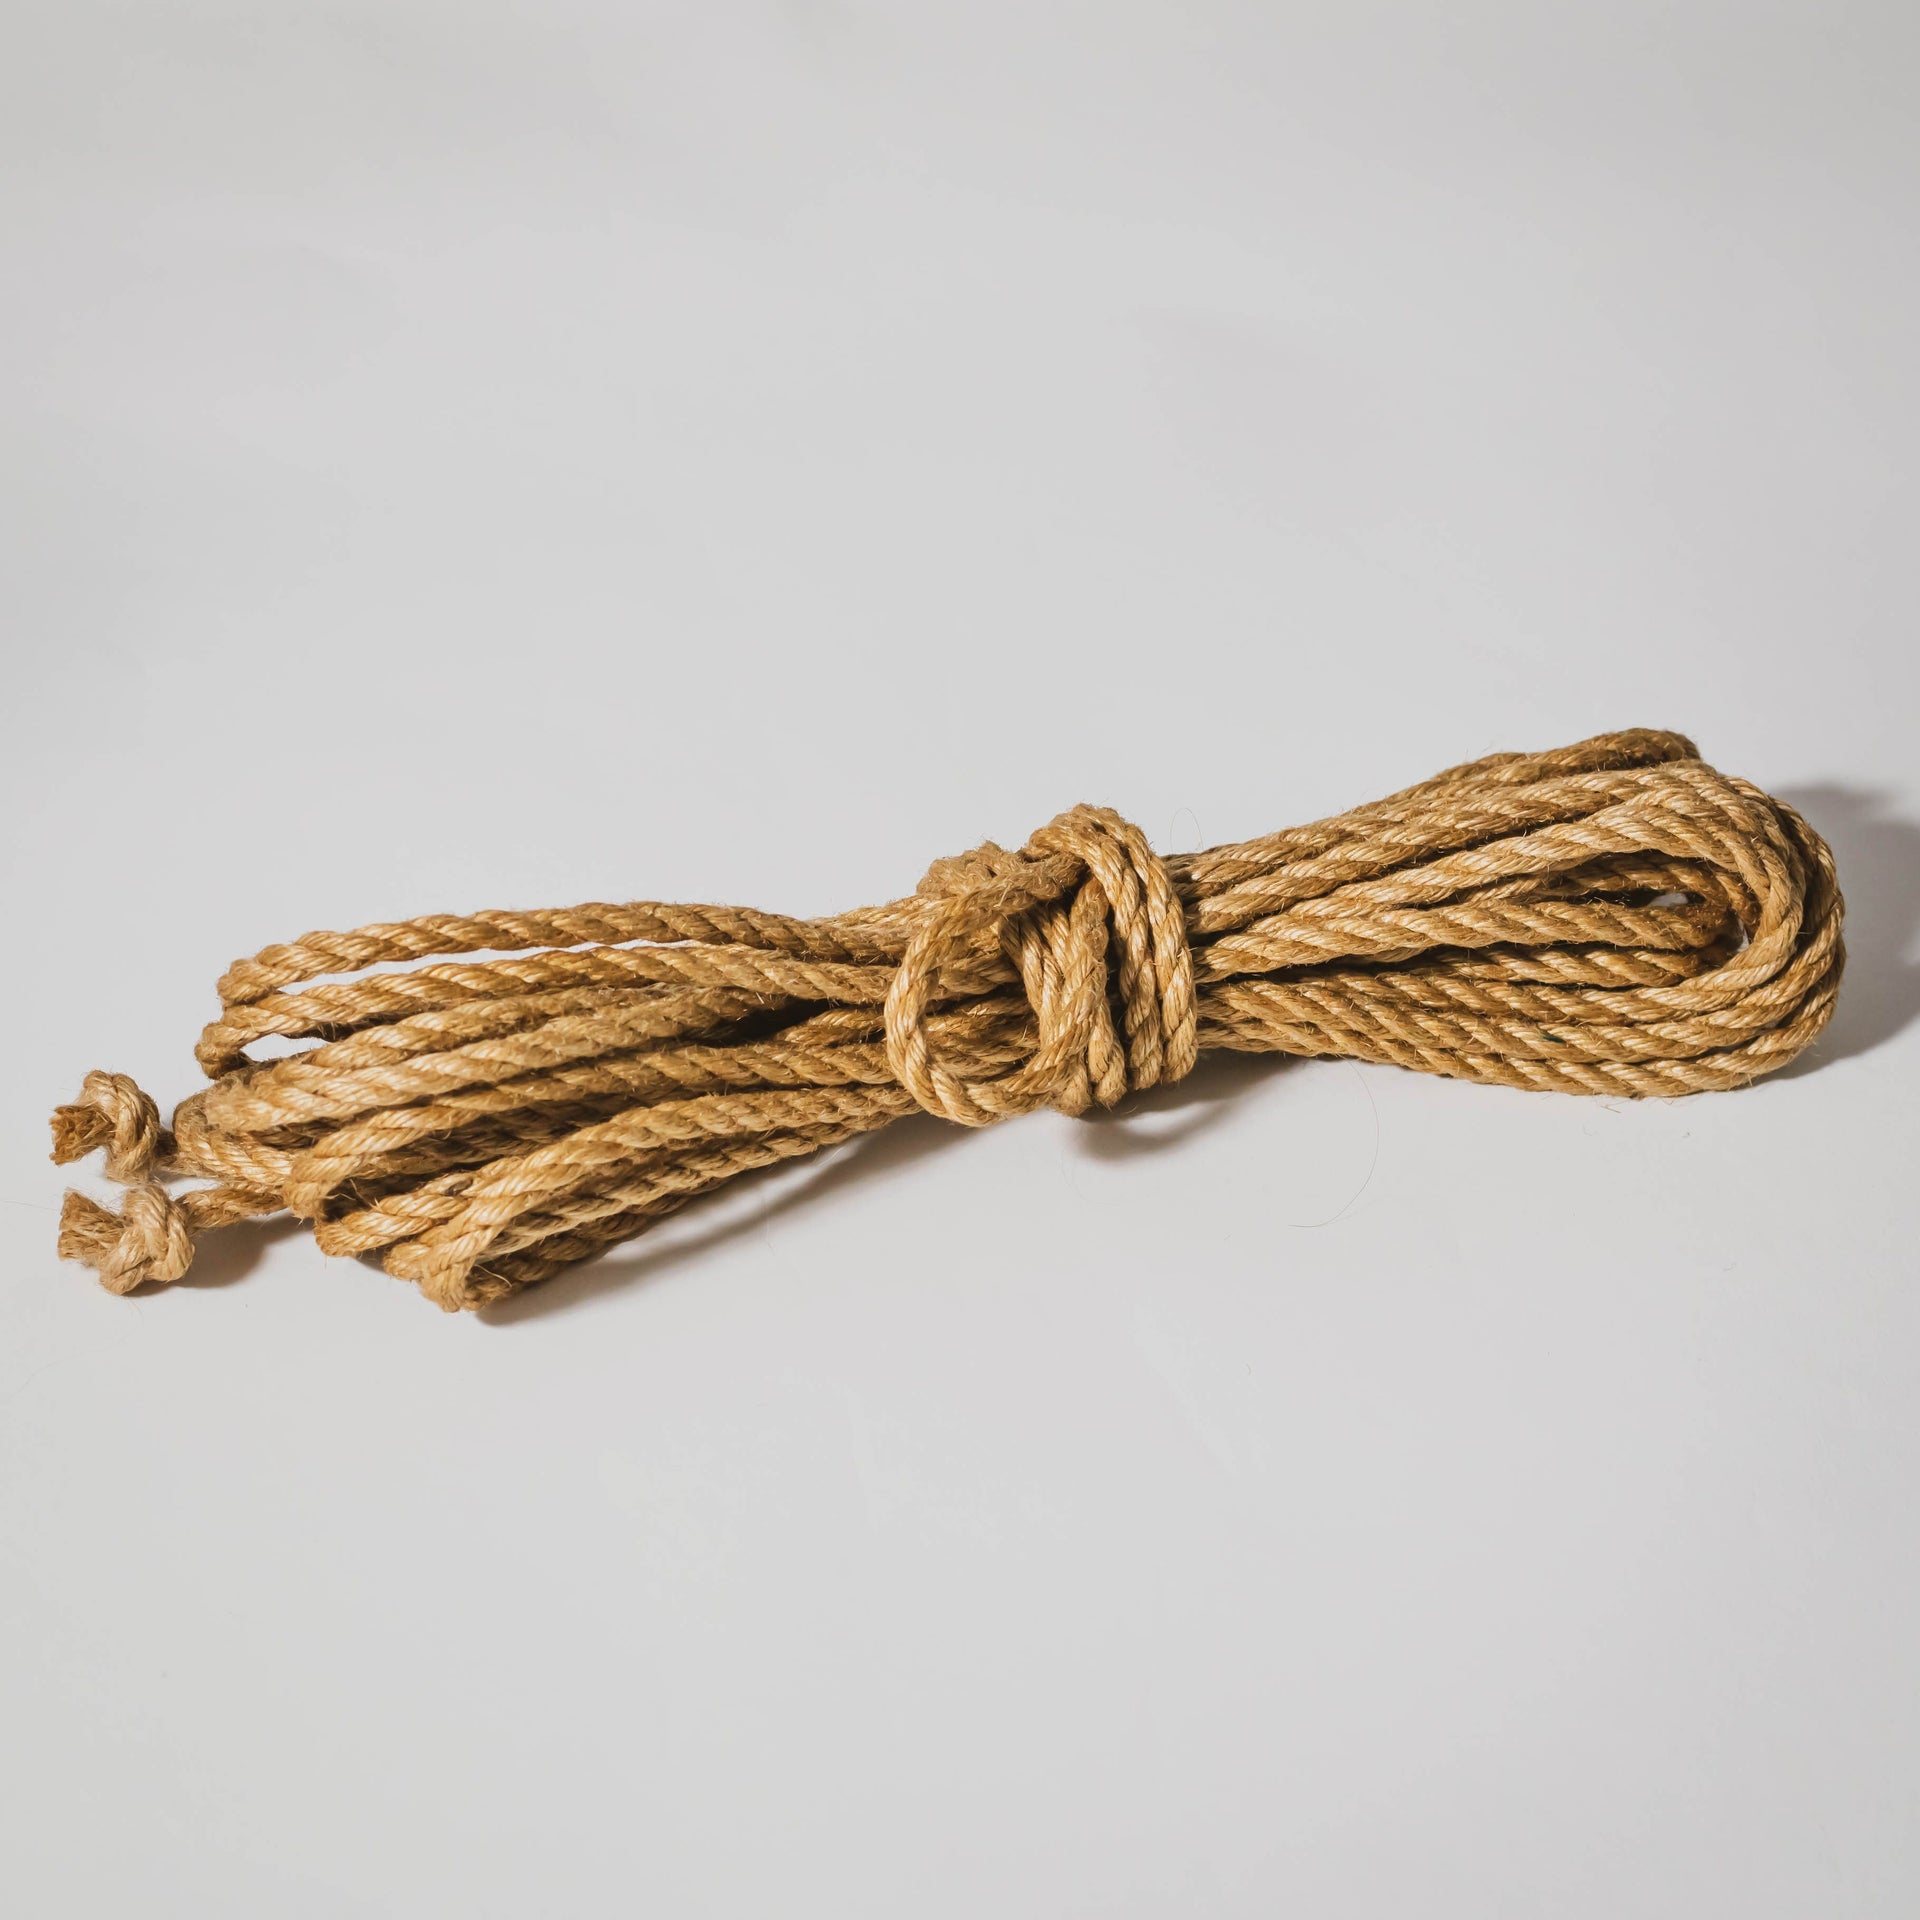 6mm Black Bondage Rope (By The Metre) - RopeServices UK